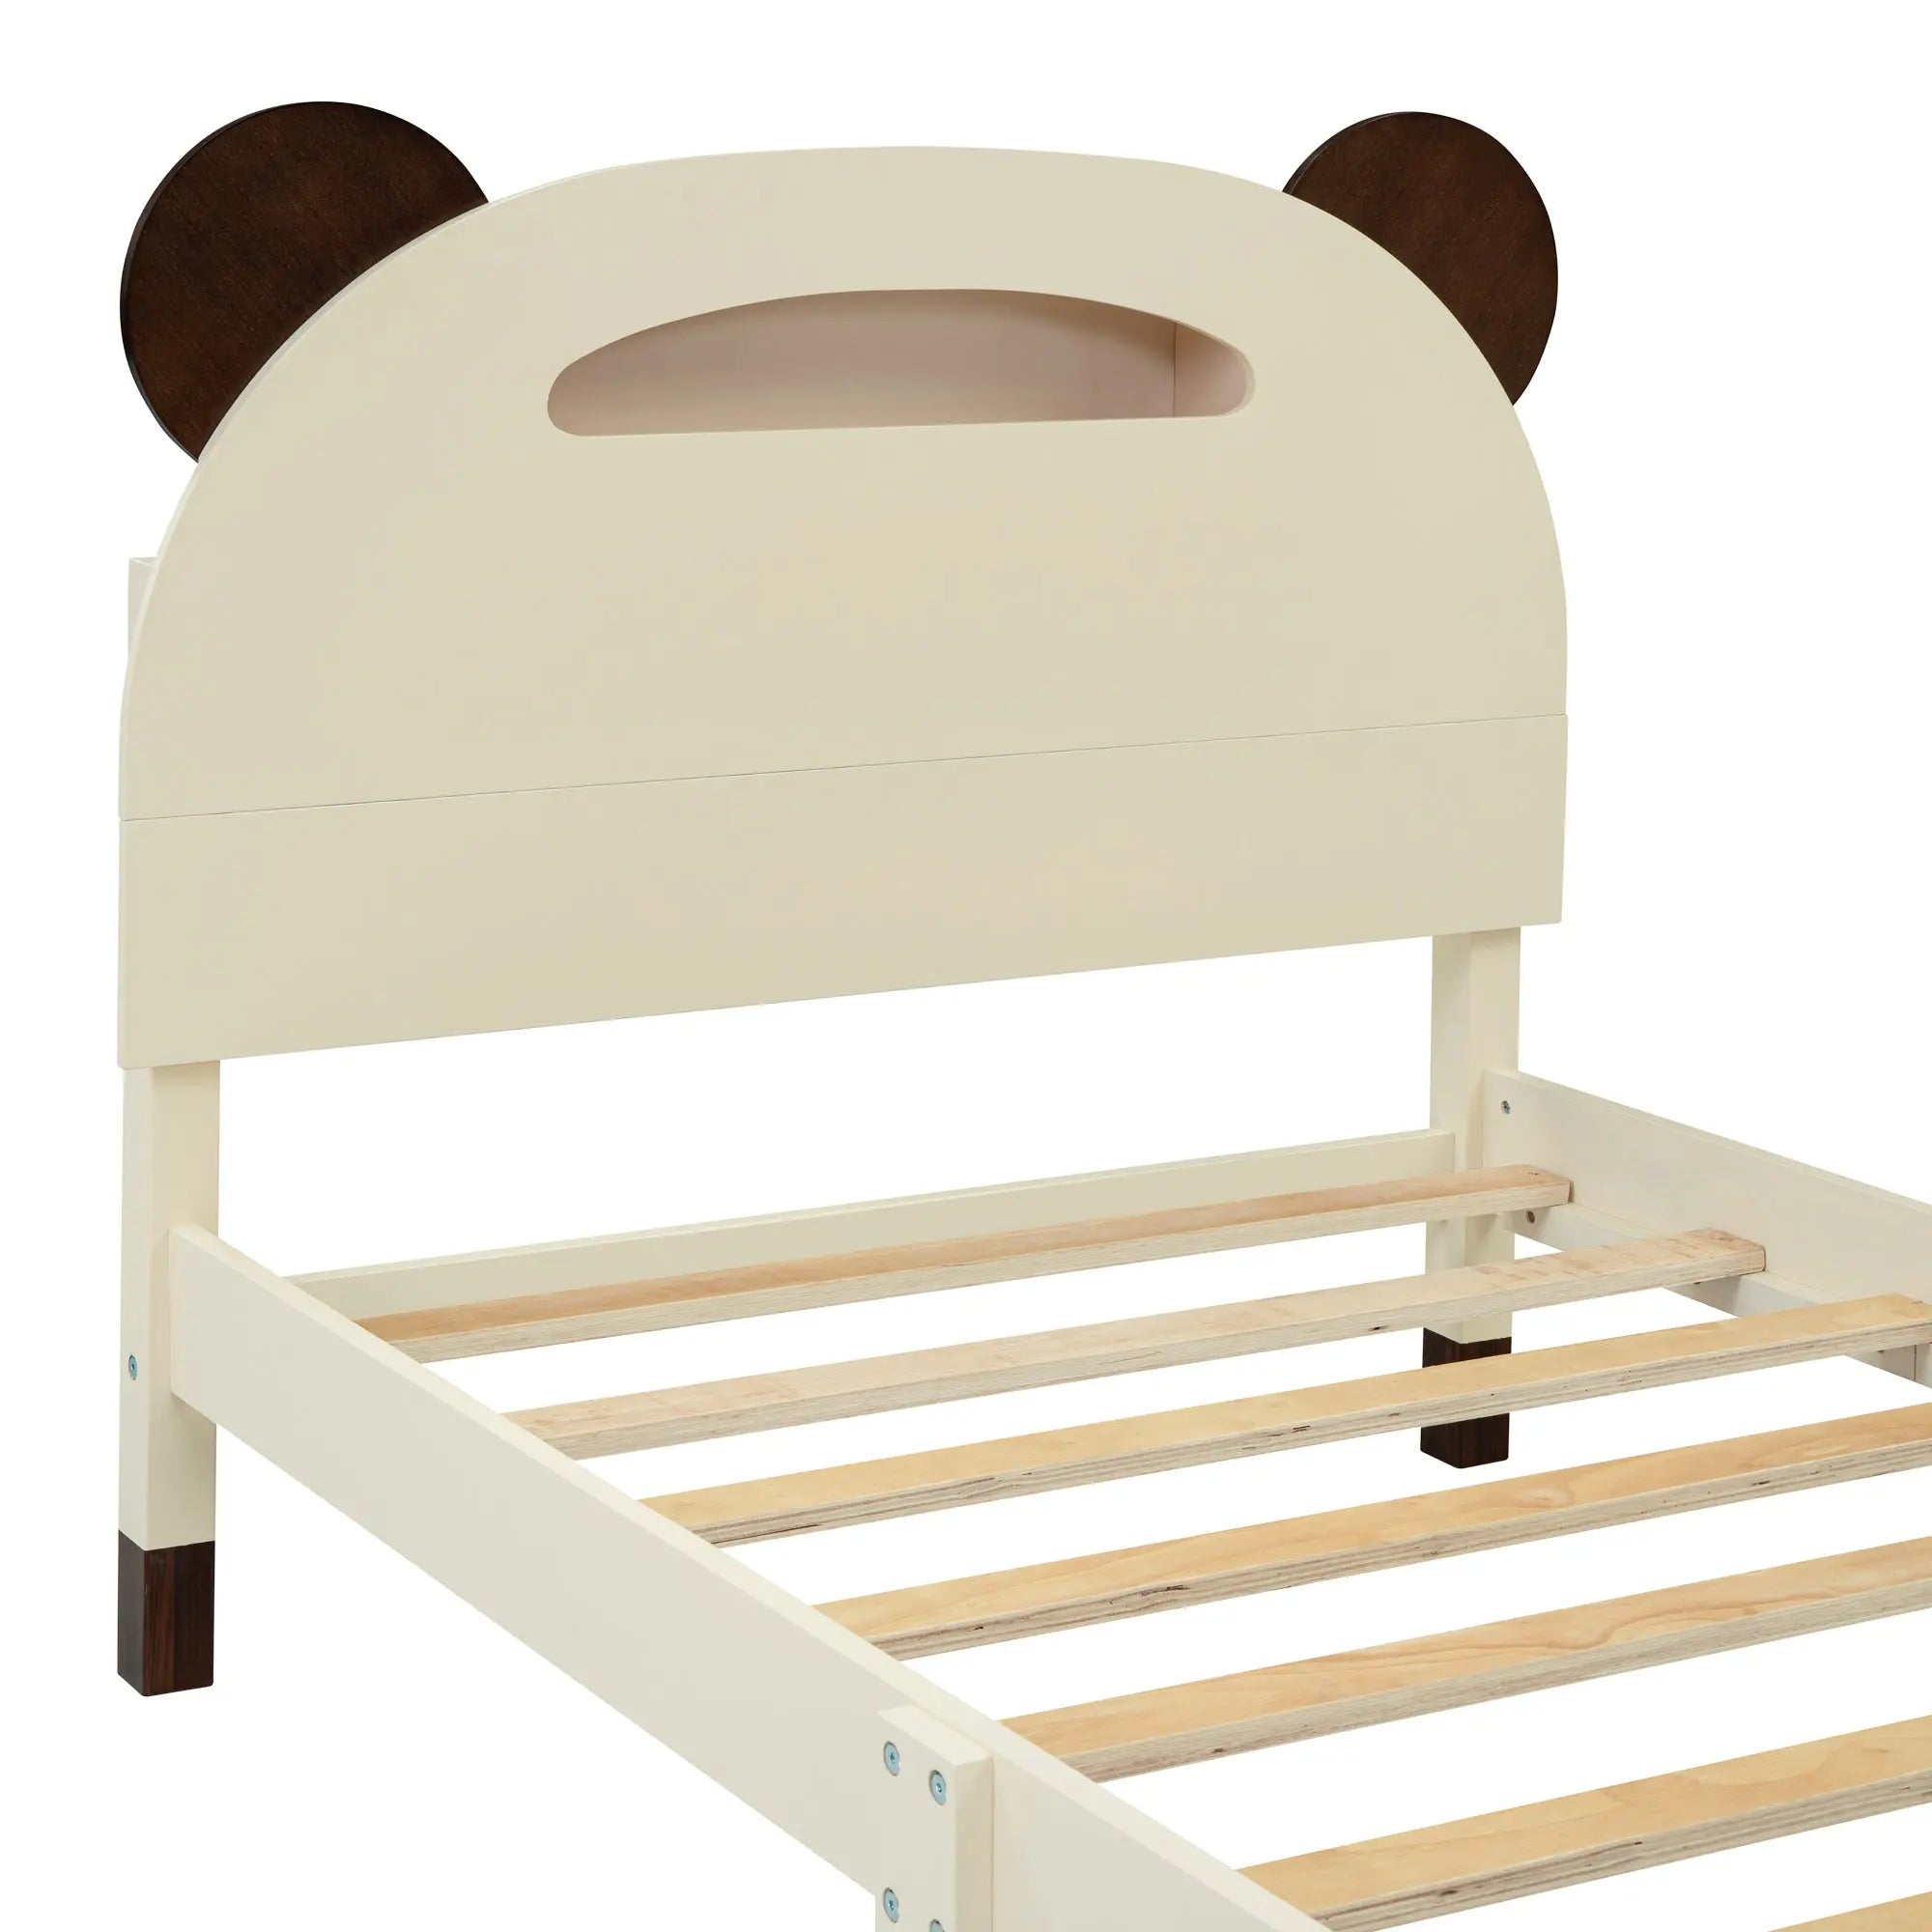 Bellemave Wood Platform Bed with Bear-shaped Headboard,Bed with Motion Activated Night Lights Bellemave